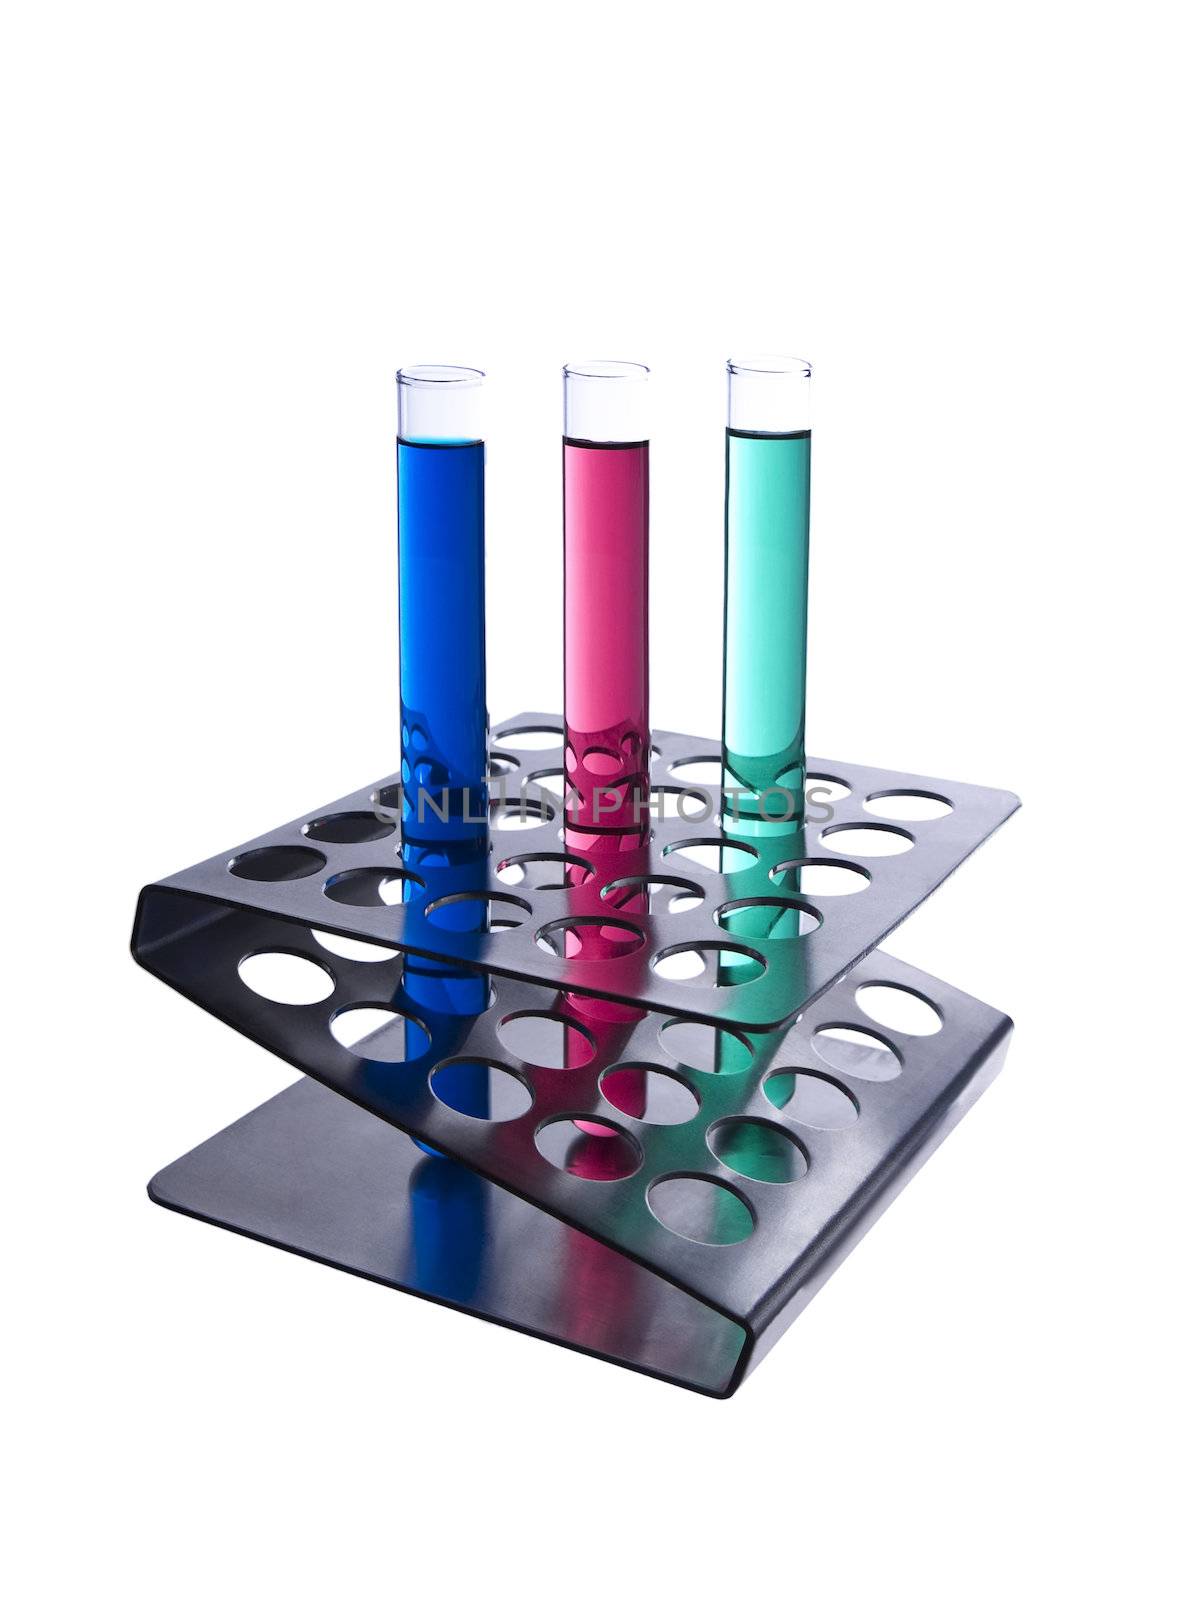 Three test tubes filled with colored liquids on a metallic rack. Isolated on white.